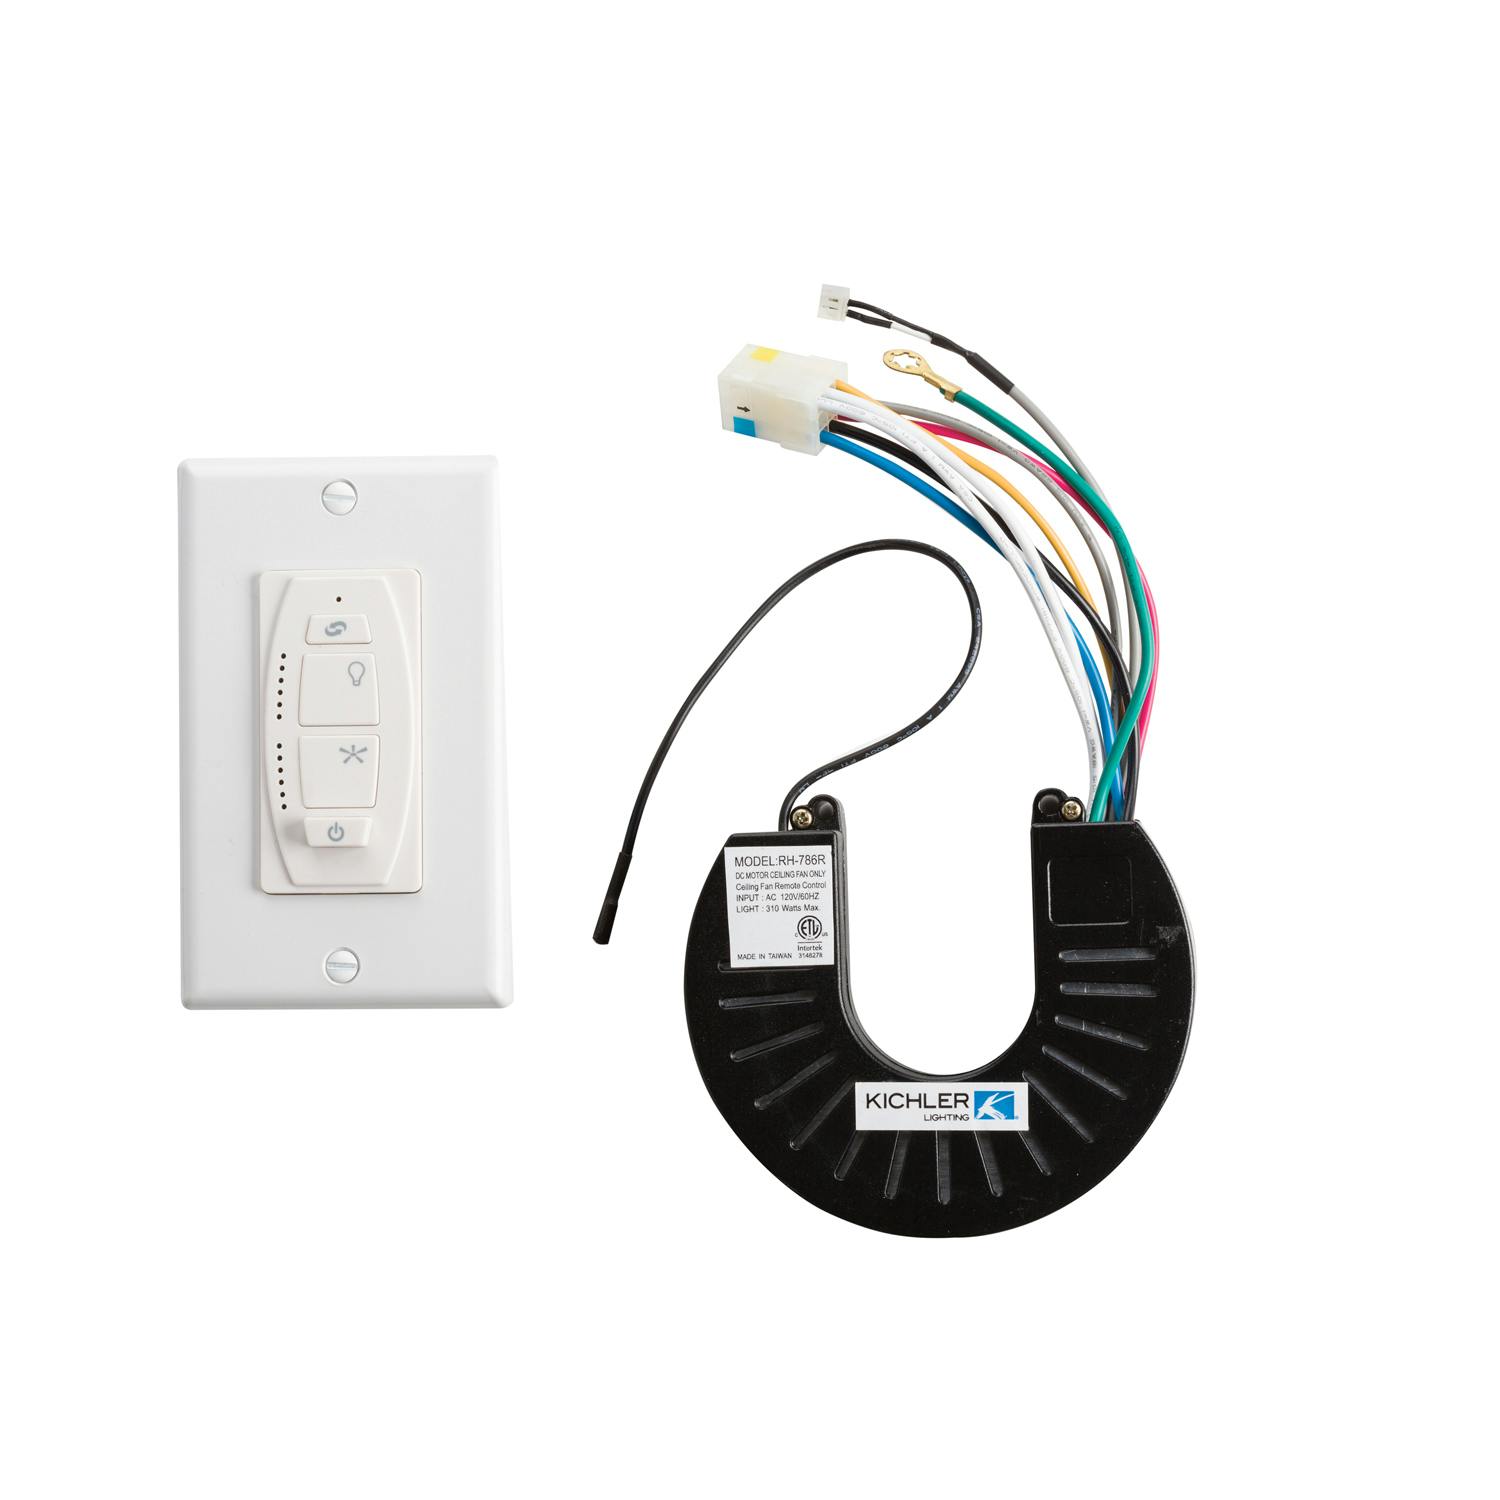 6 Speed DC Wall Control System White on a white background